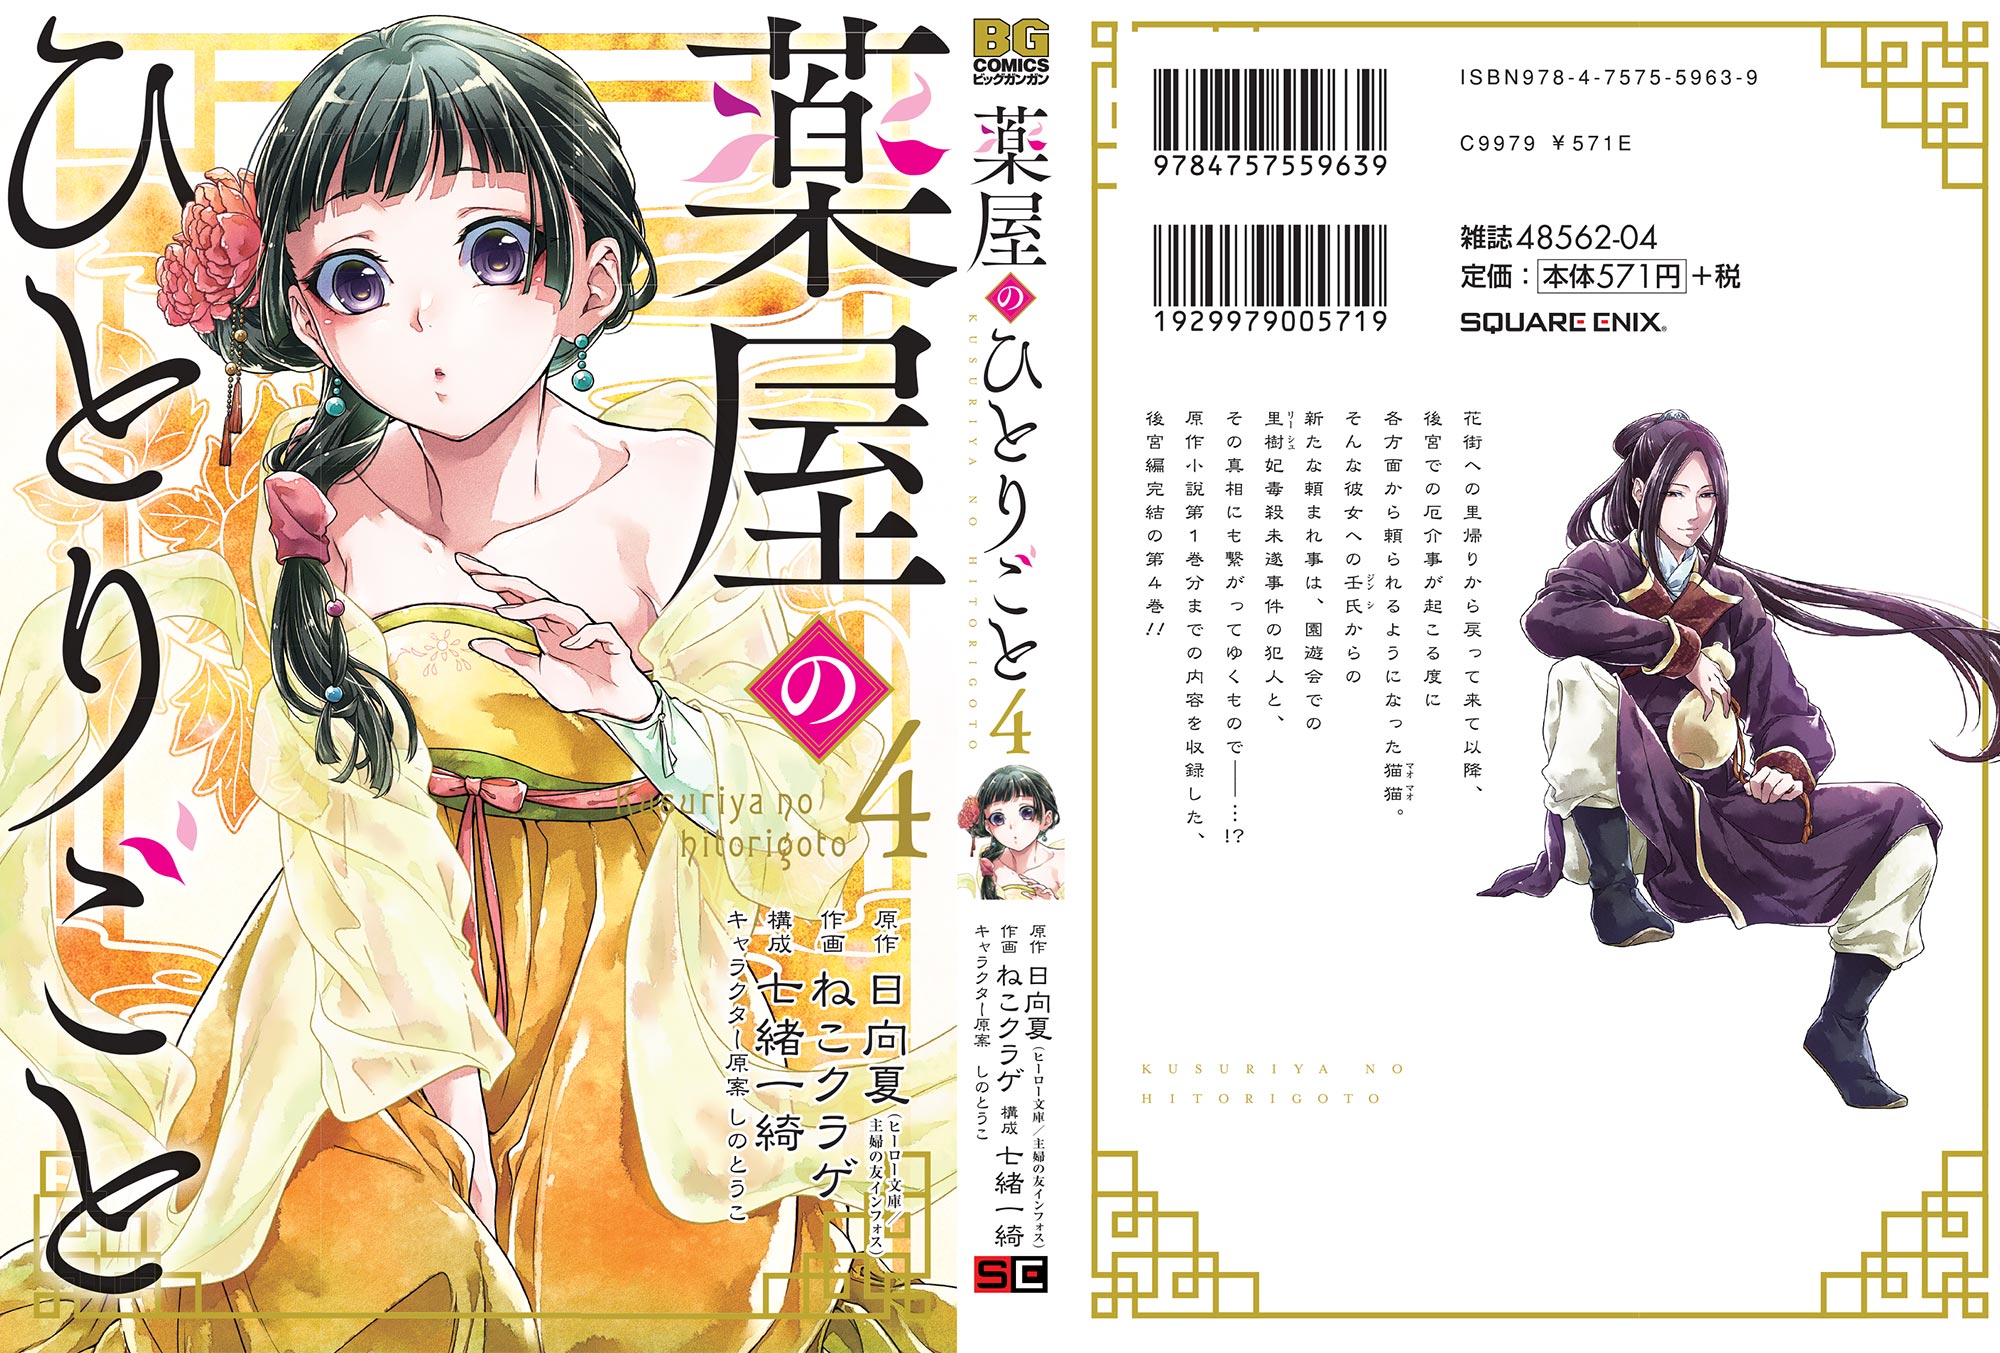 The Apothecary Diaries Volume 4 Jacket Japanese Cover